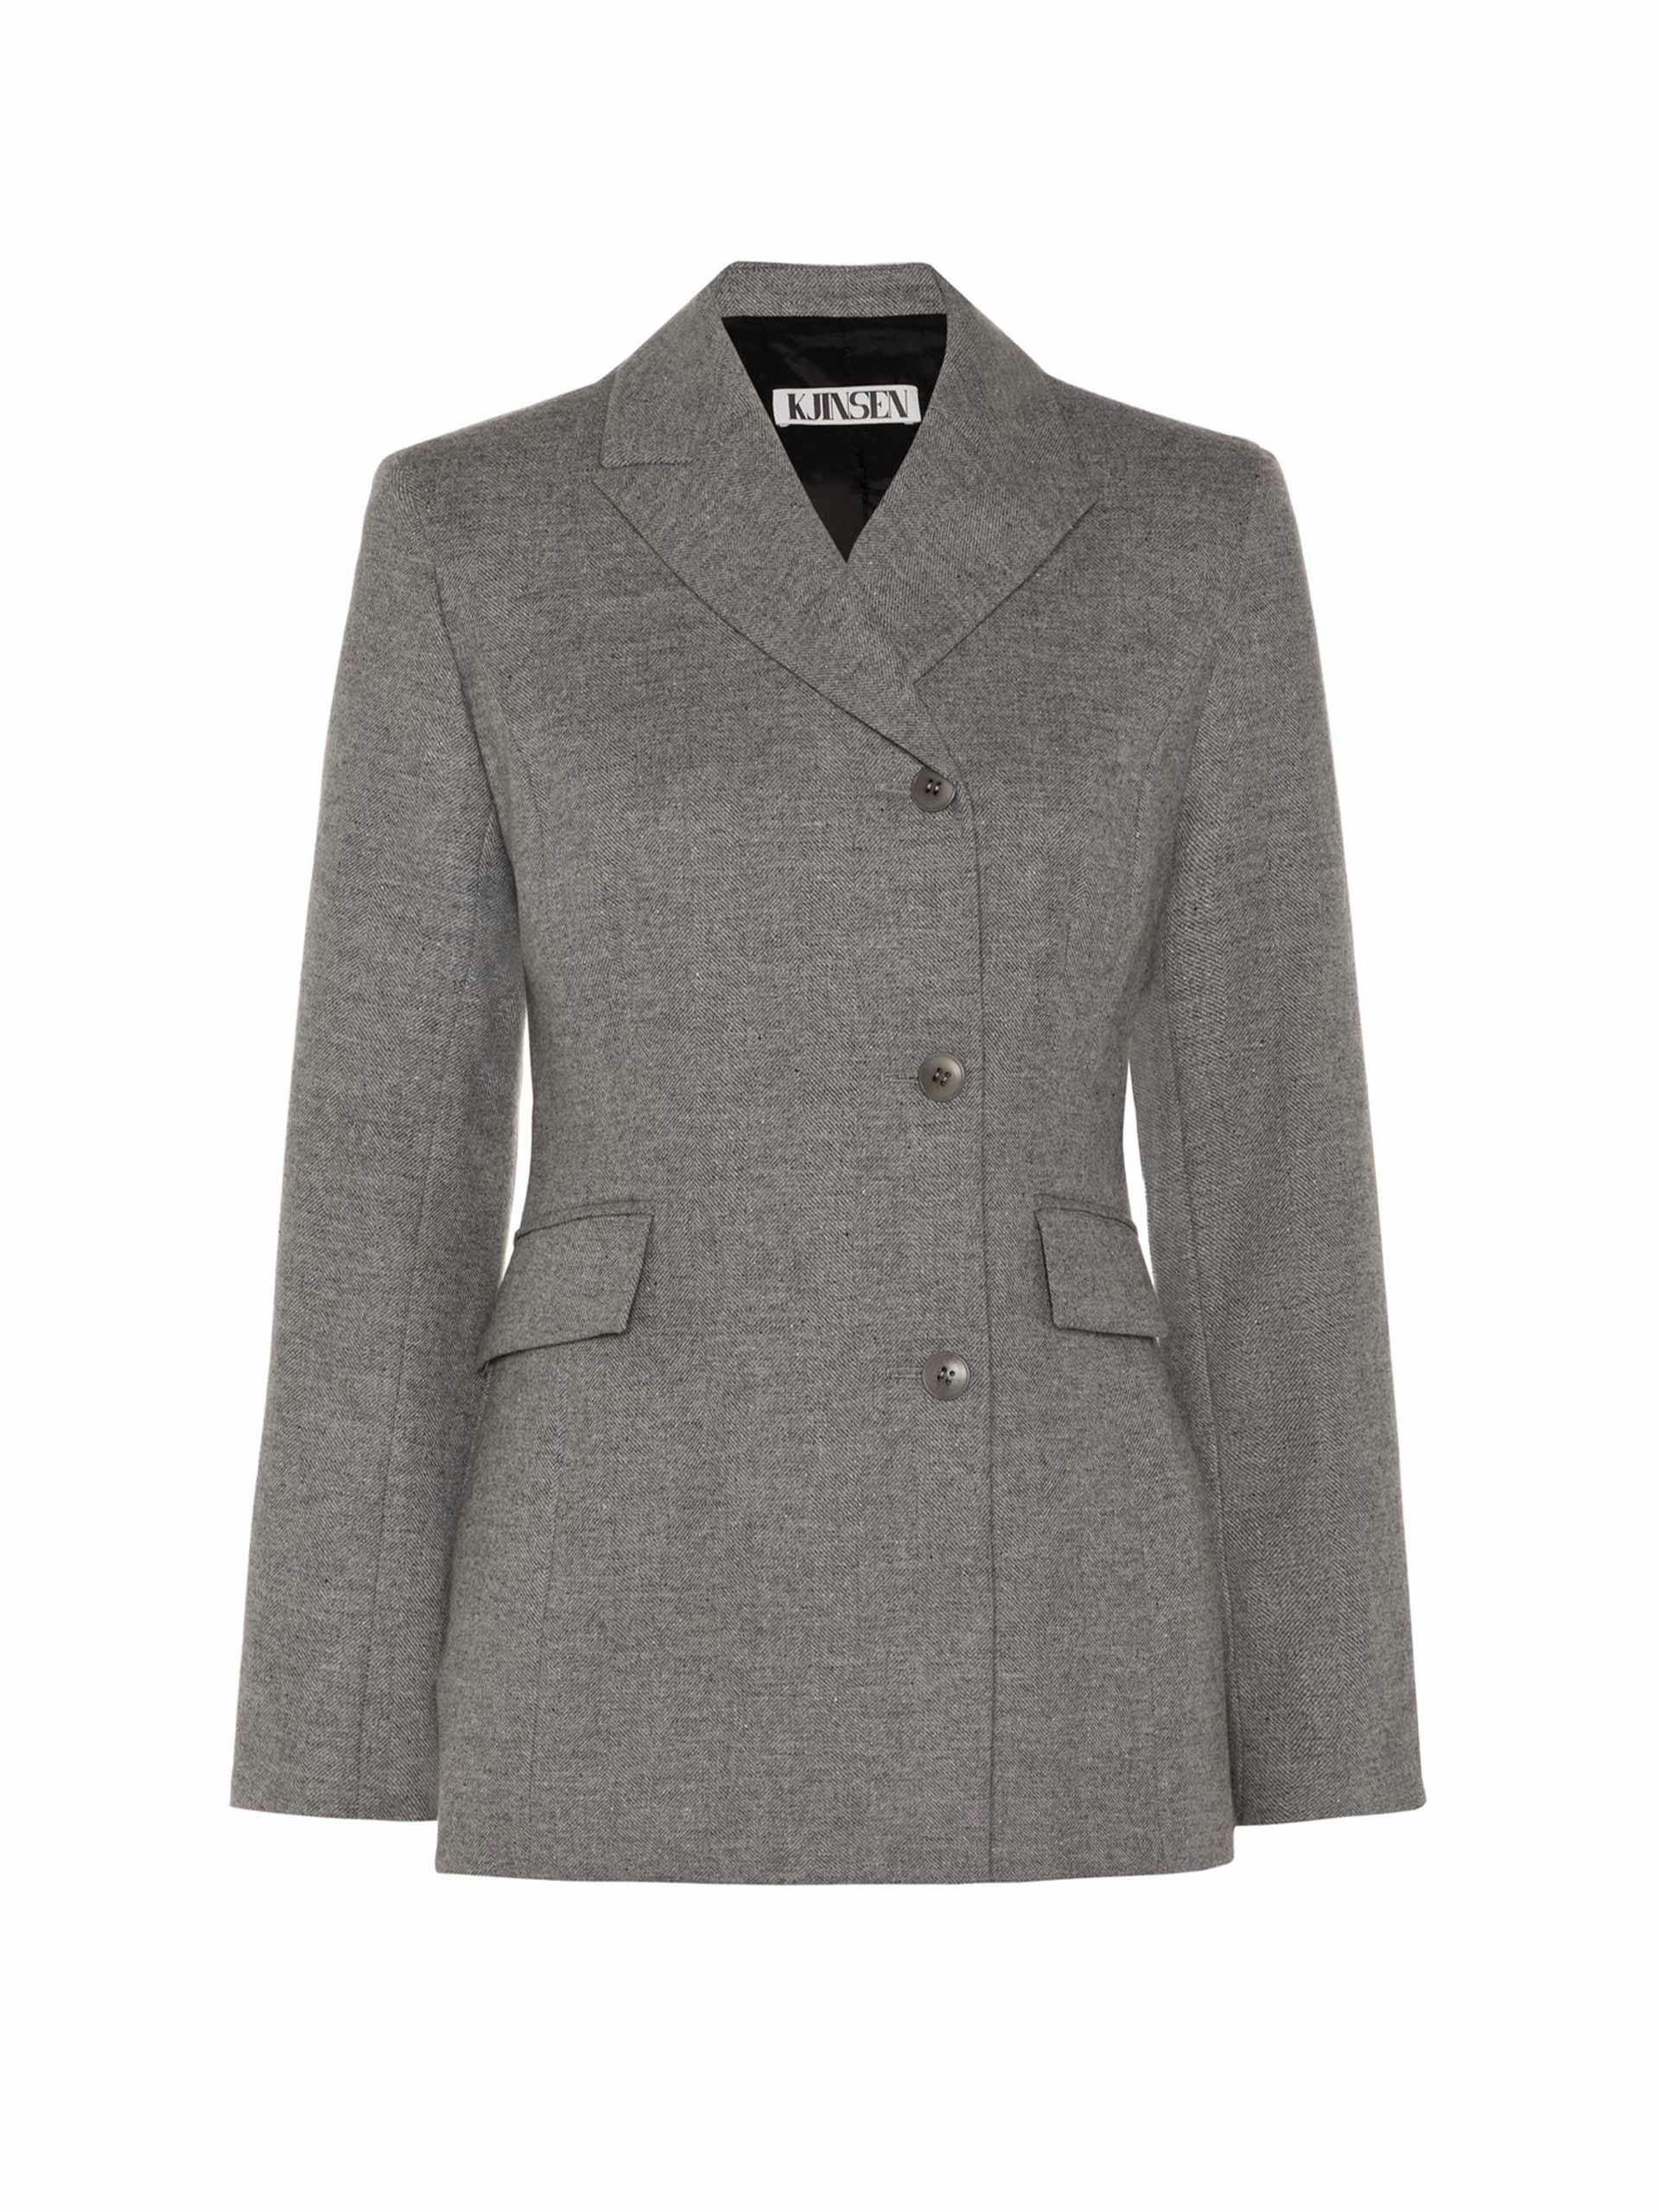 Grey double-breasted wool and cashmere blazer